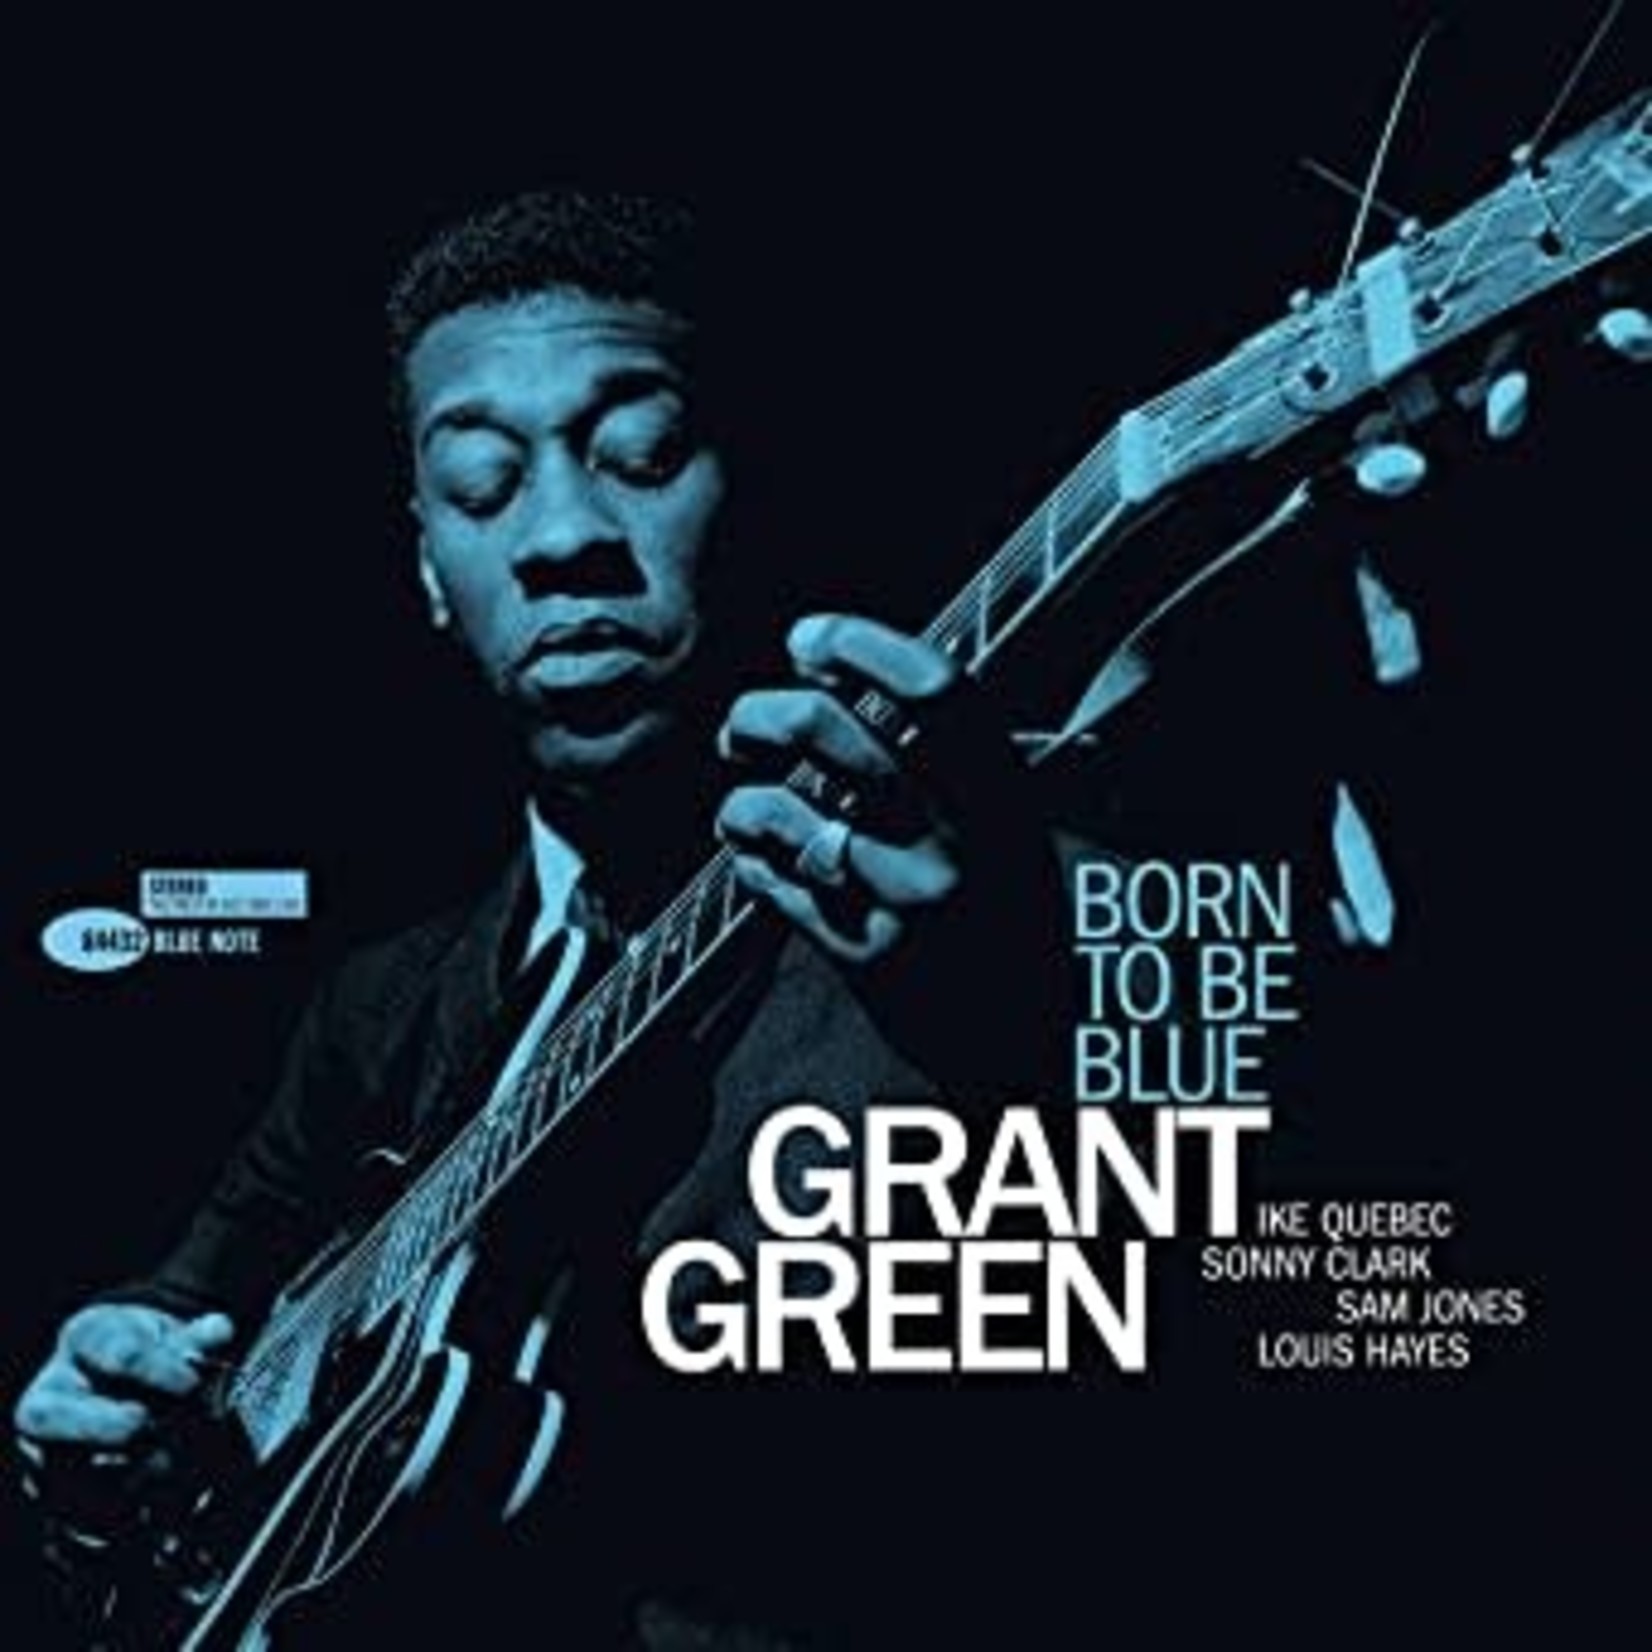 [New] Grant Green - Grant's First Stand (Blue Note 80 Series)